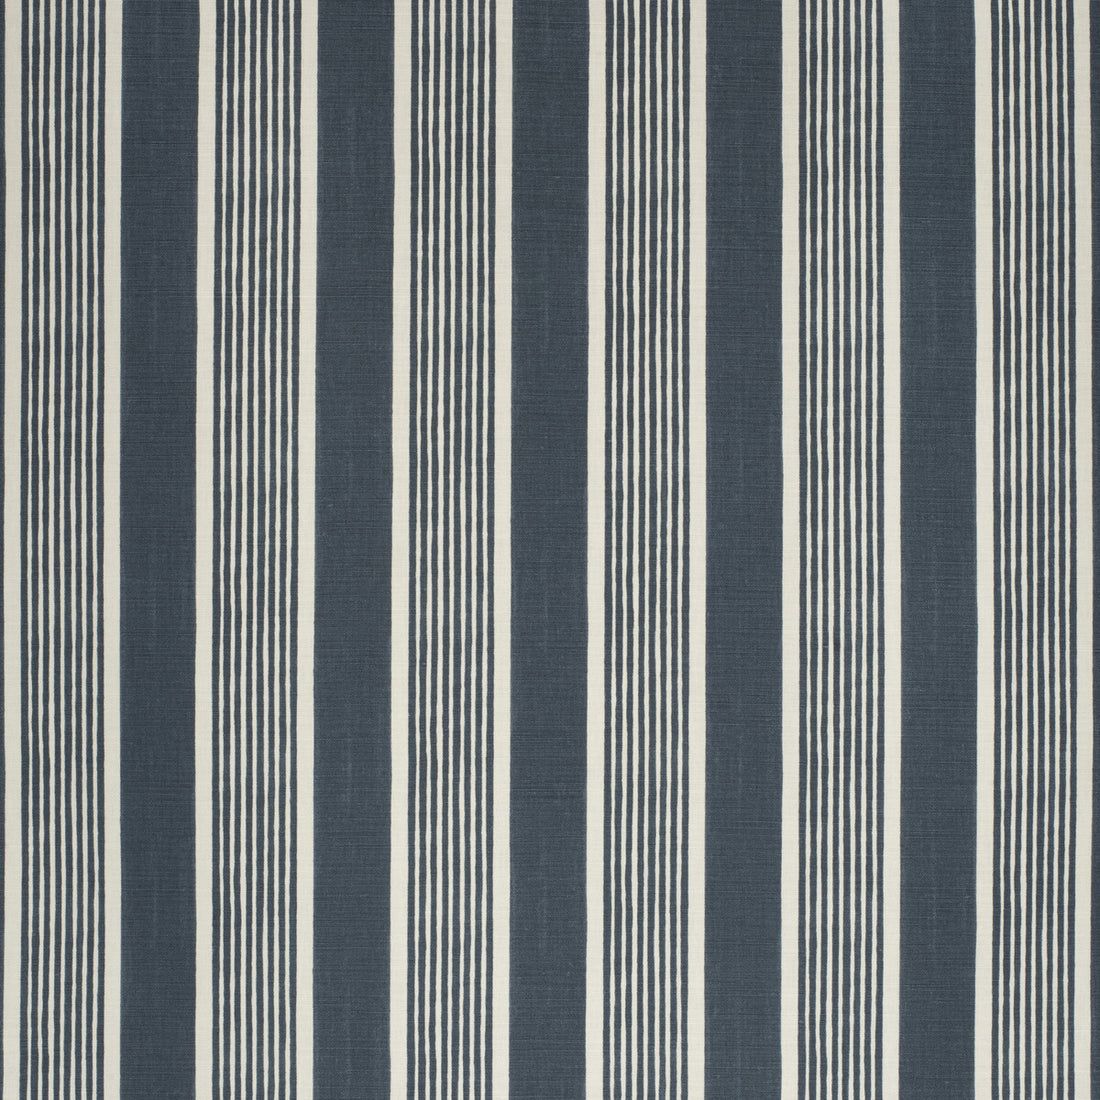 Elba Stripe fabric in navy color - pattern 2020131.501.0 - by Lee Jofa in the Paolo Moschino Fabrics collection